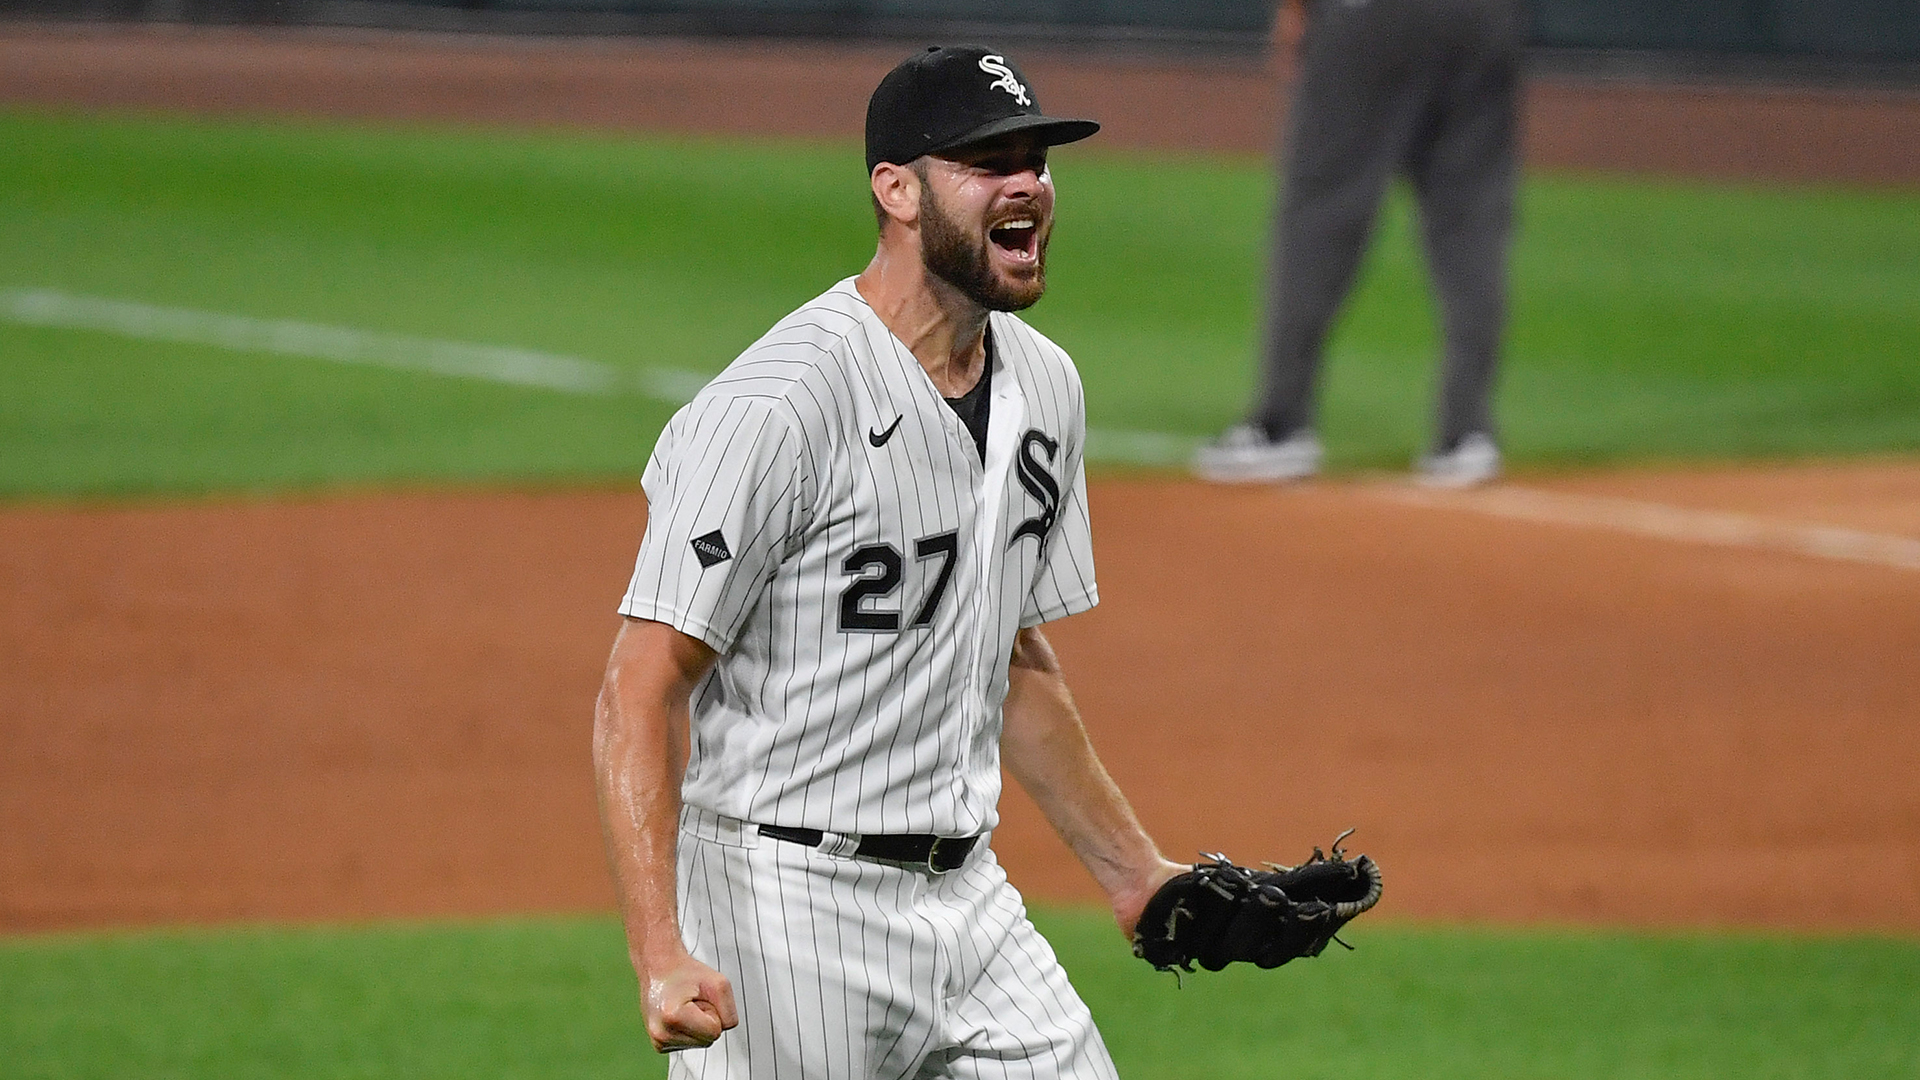 Lucas Giolito proud to speak out on injustice